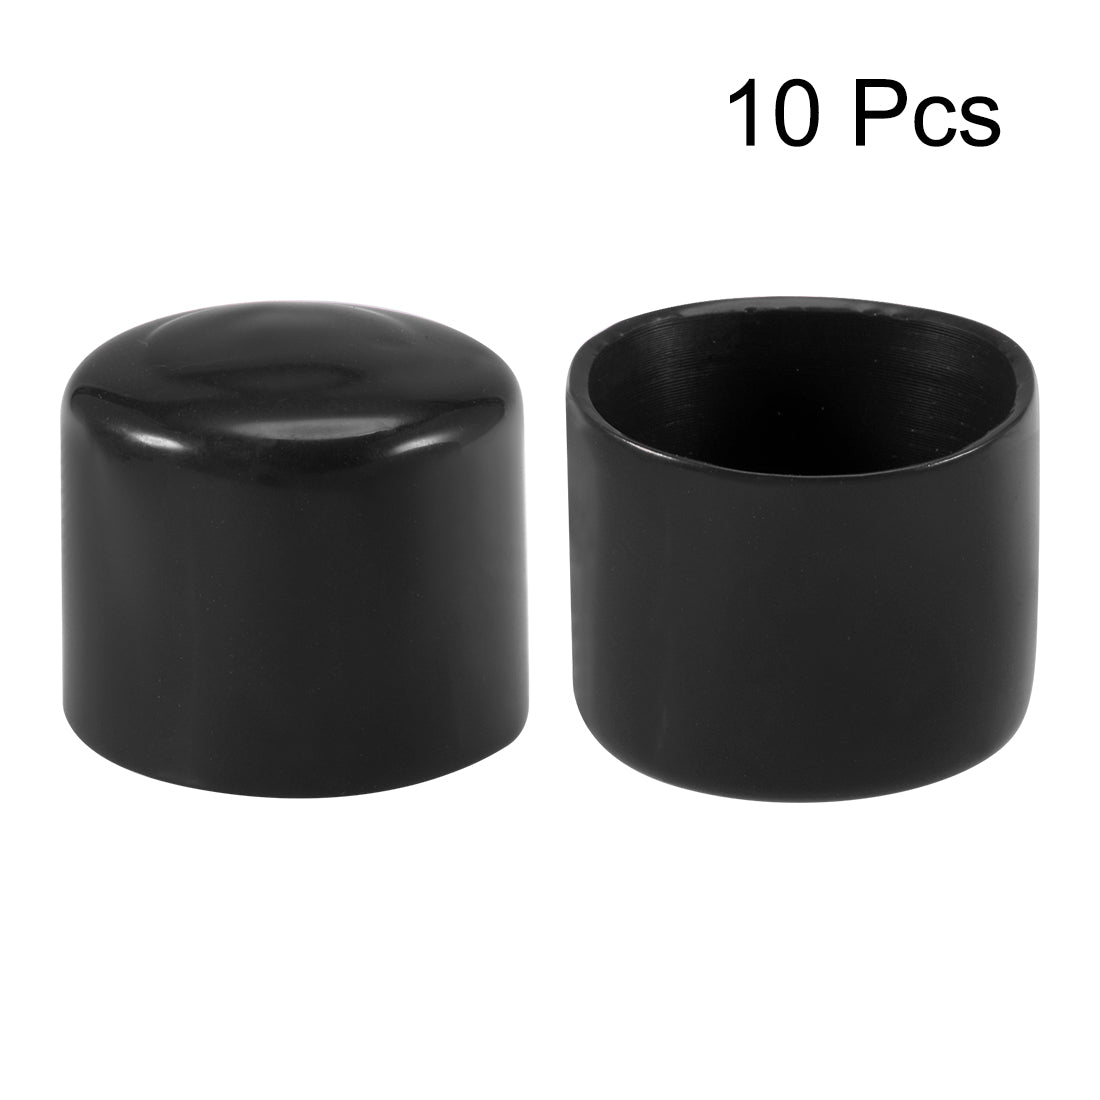 uxcell Uxcell 10pcs Rubber End Caps 48mm ID 42mm Height Screw Thread Protectors Black